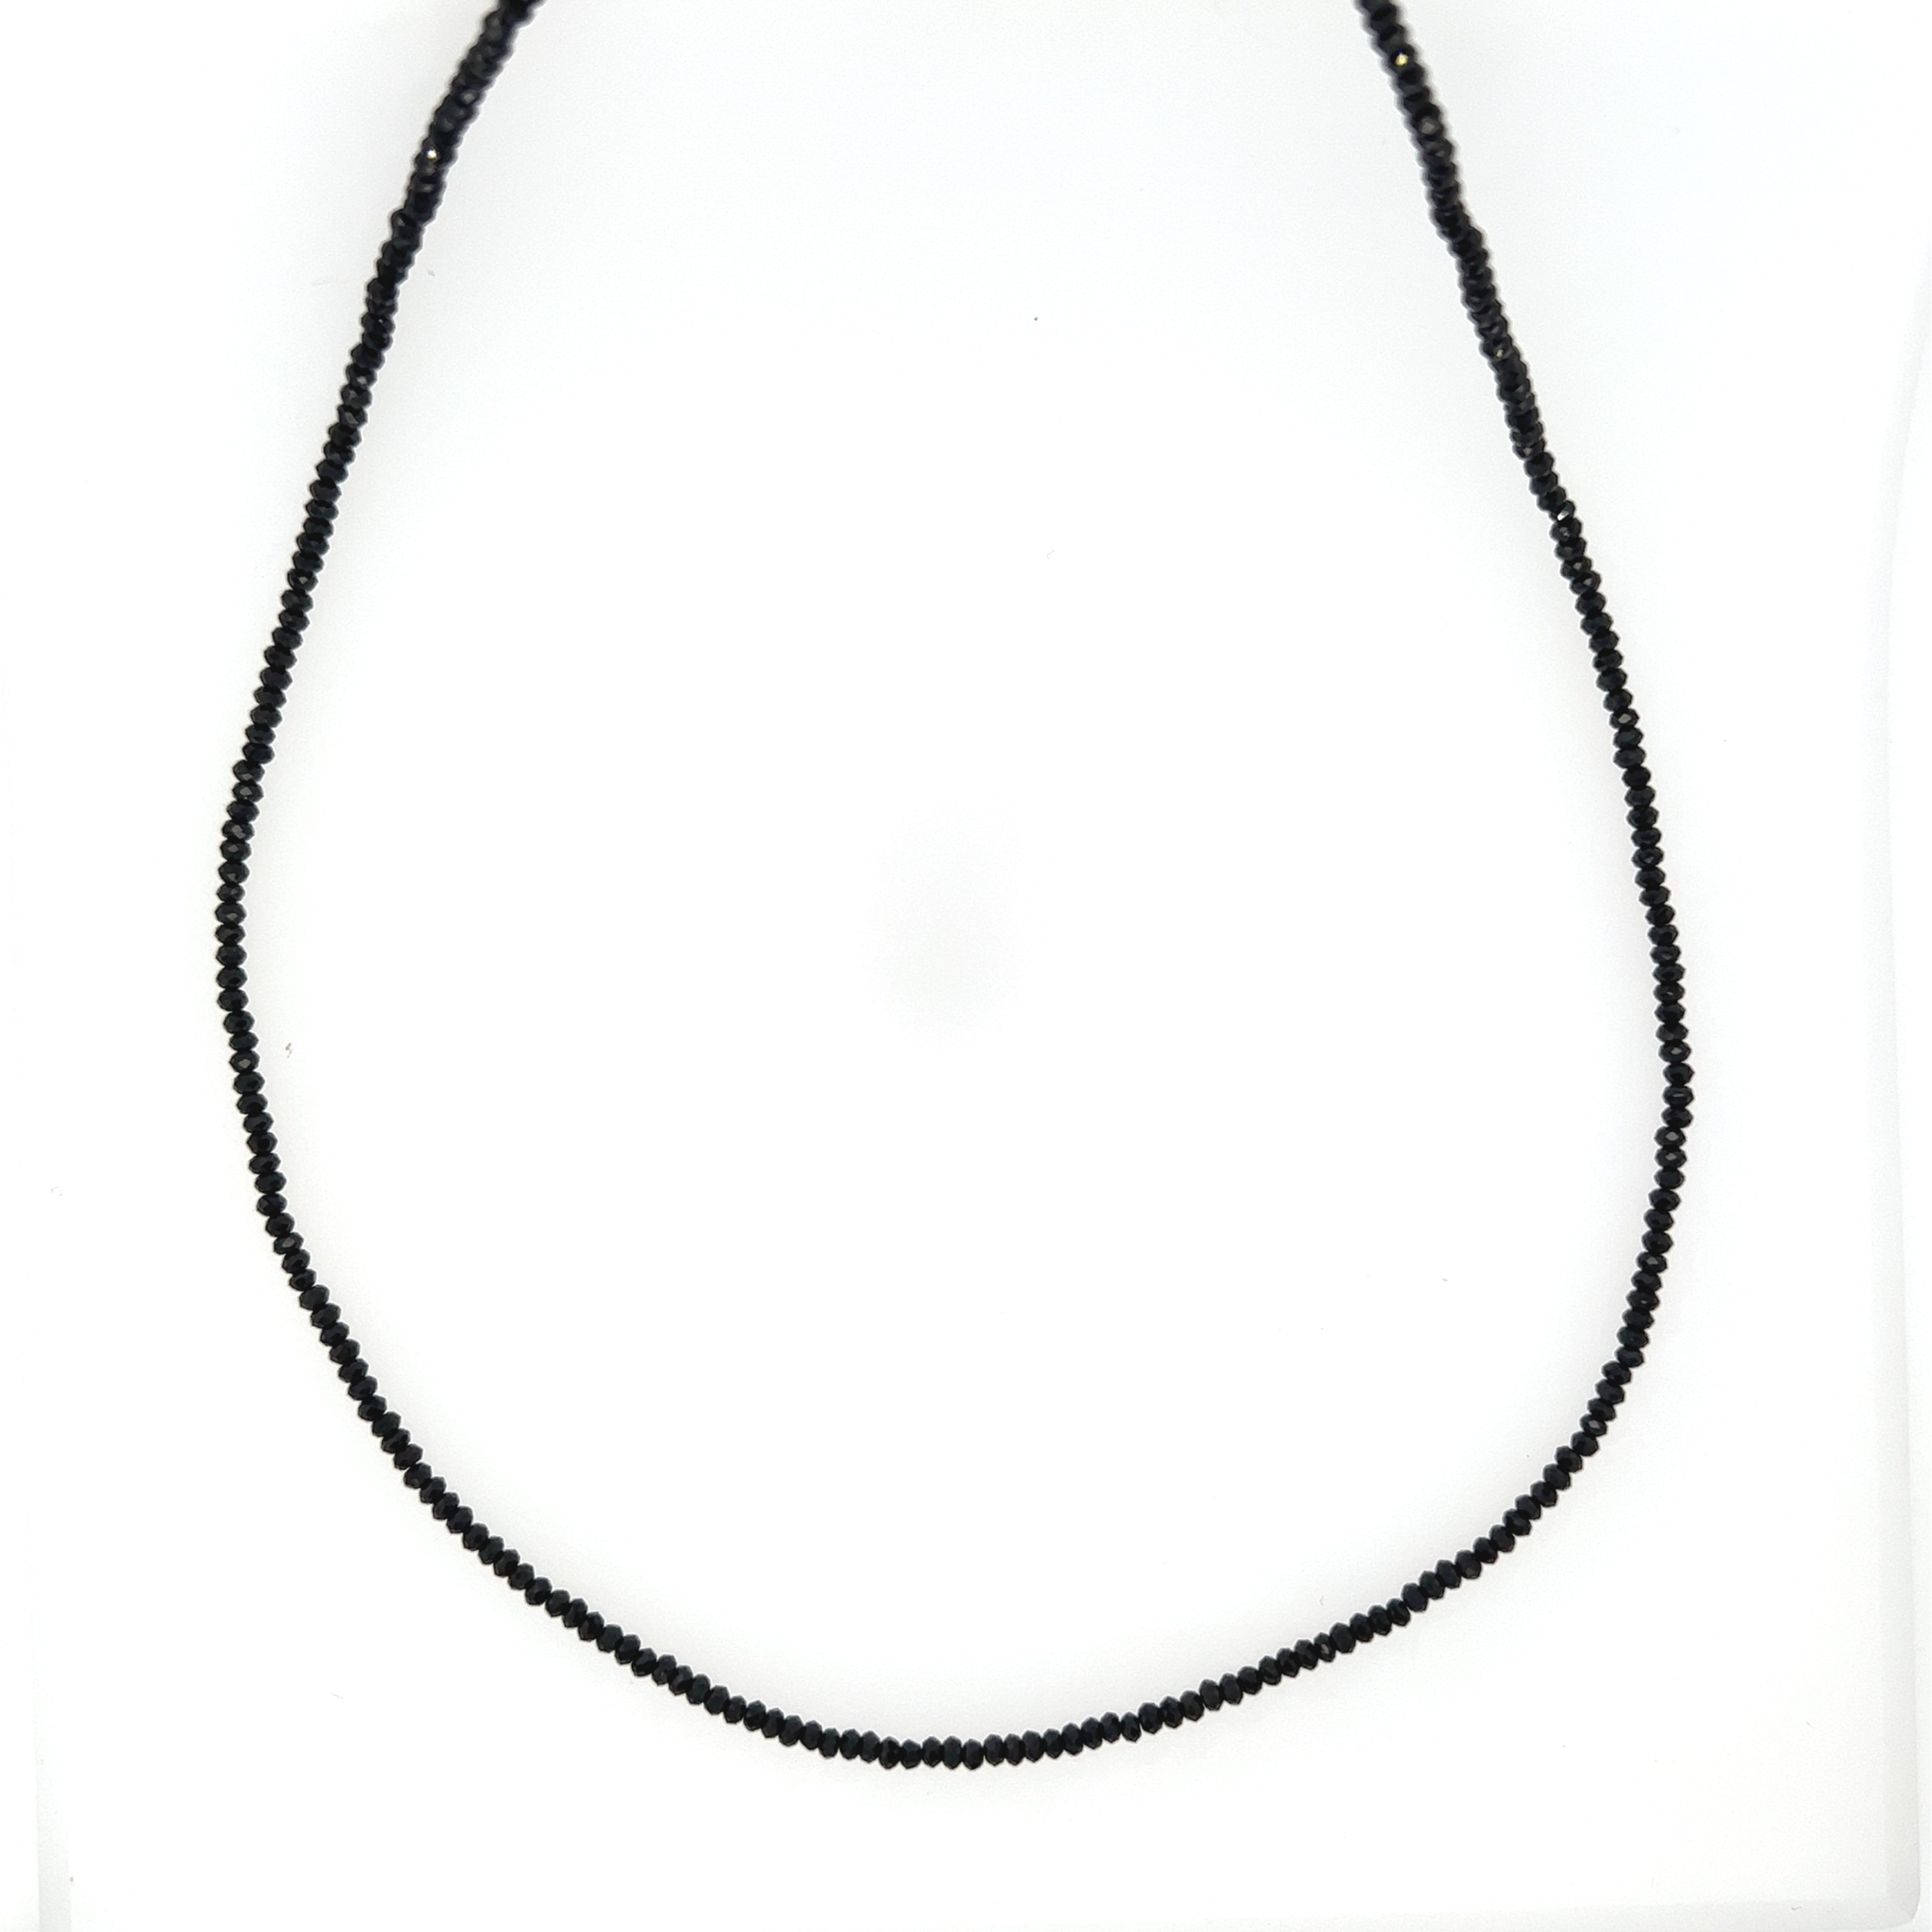 Equinox Black Spinel Necklace – Songlines By Jewel